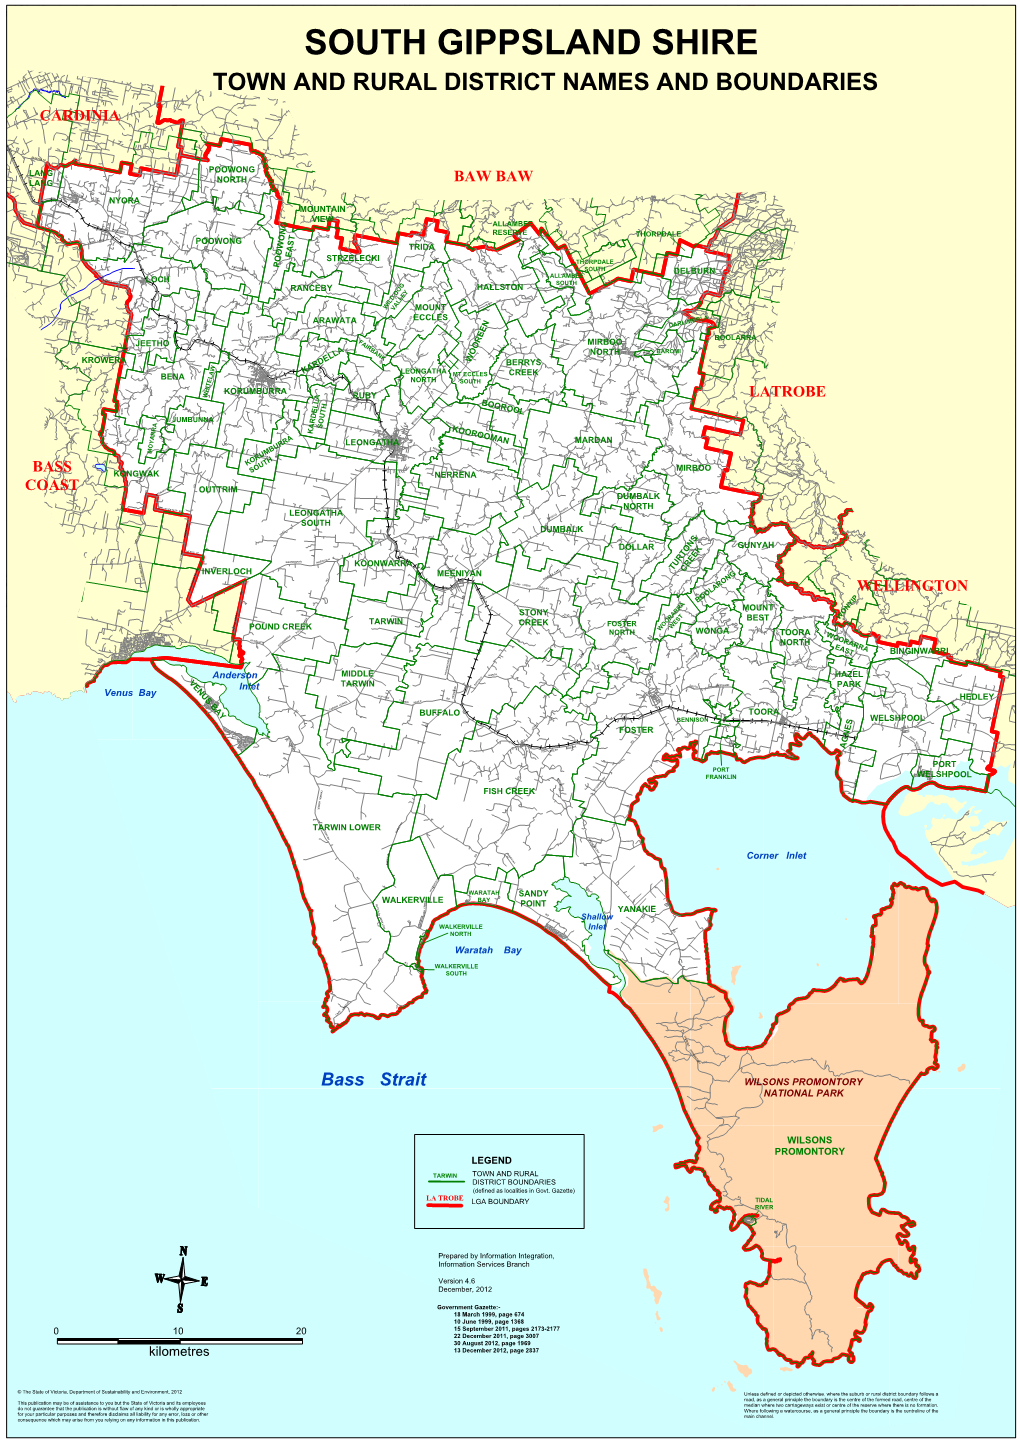 South Gippsland Shire Town and Rural District Names and Boundaries Cardinia